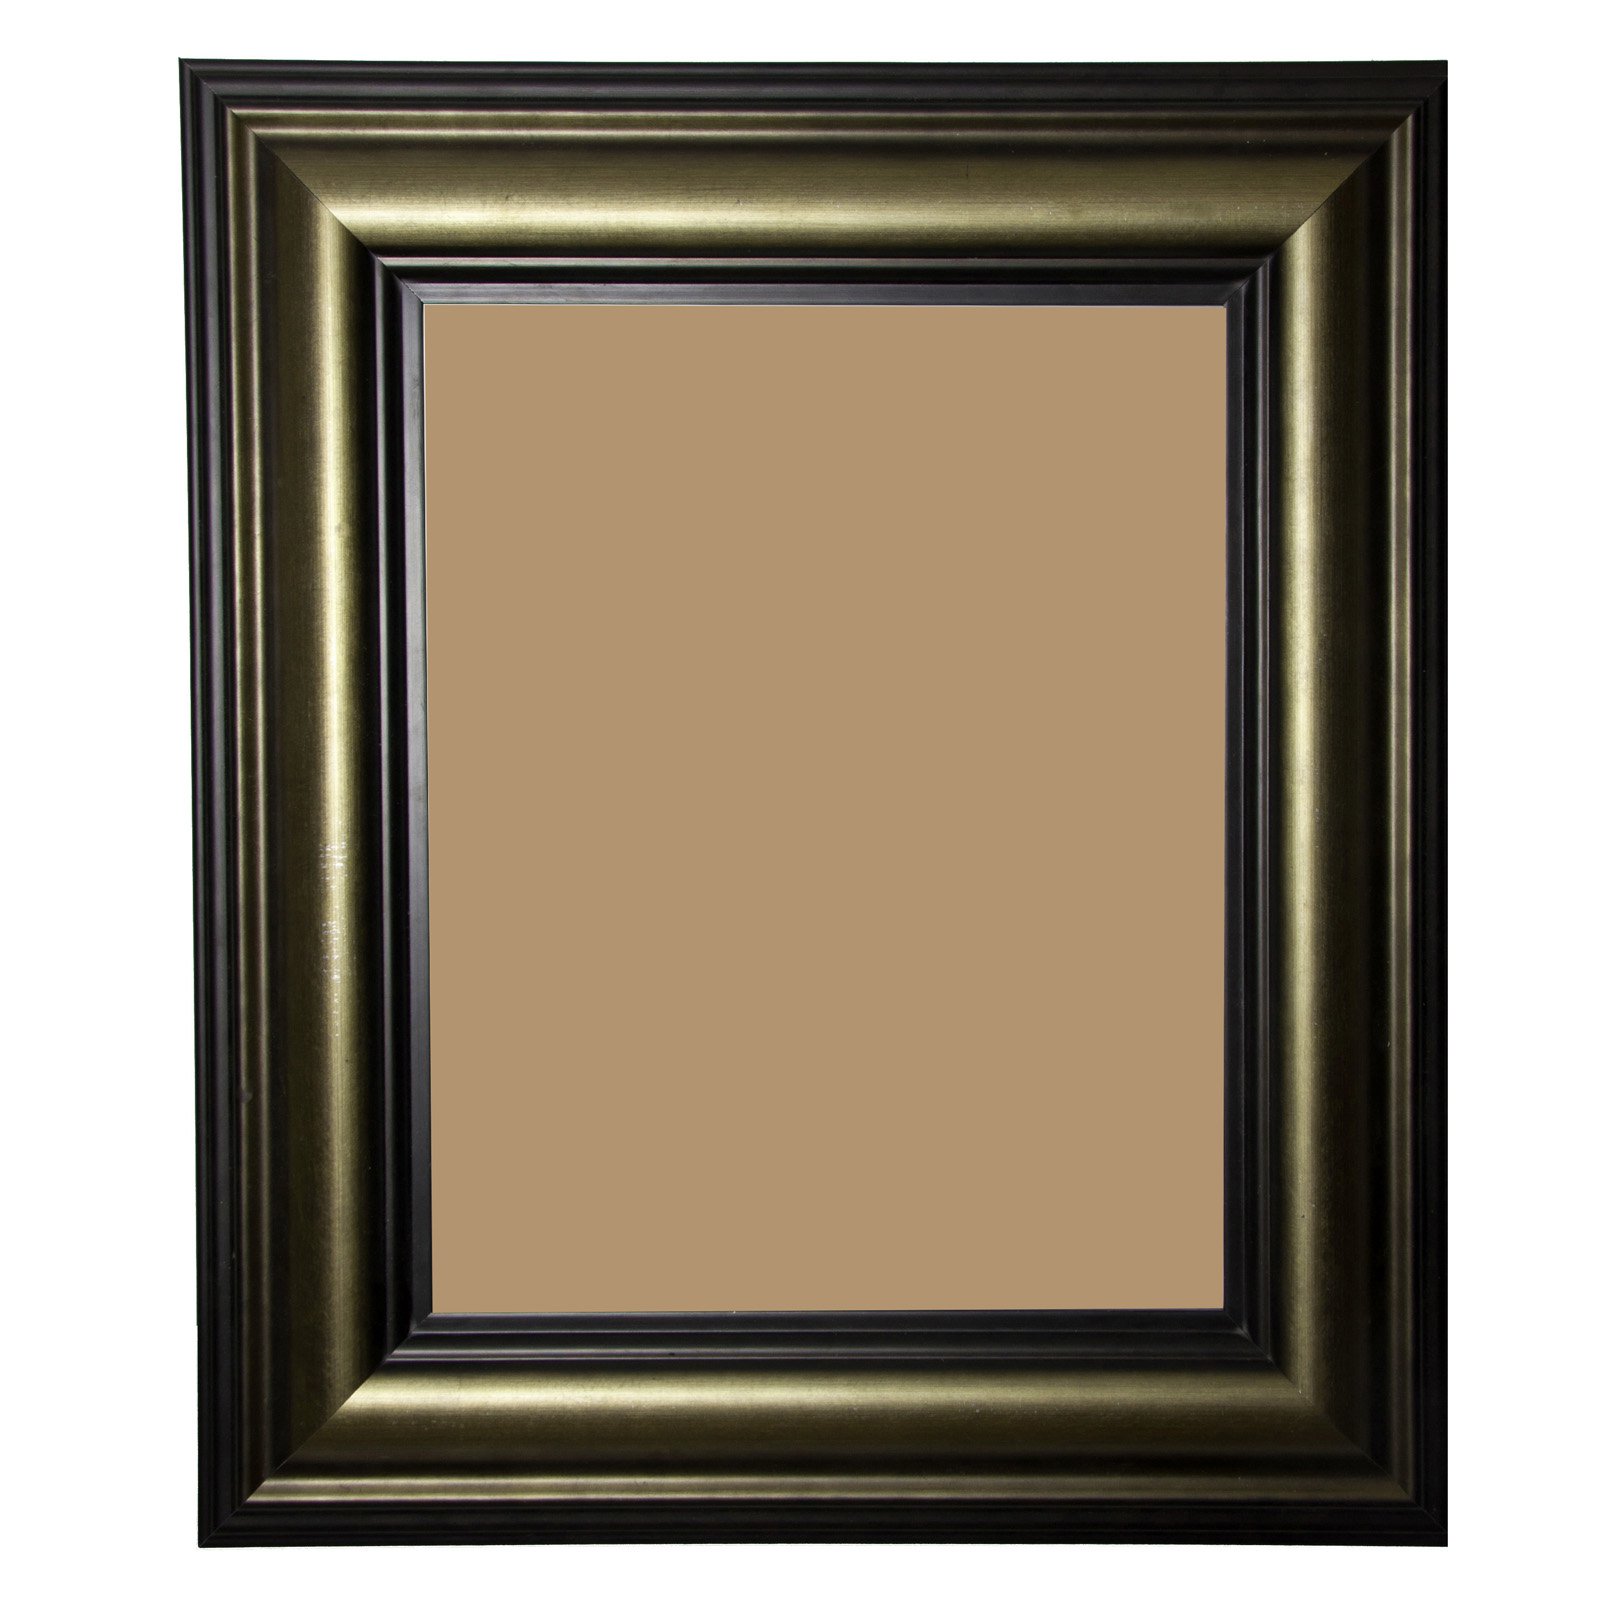 Rayne Mirrors Antique Stepped Frame - image 1 of 2